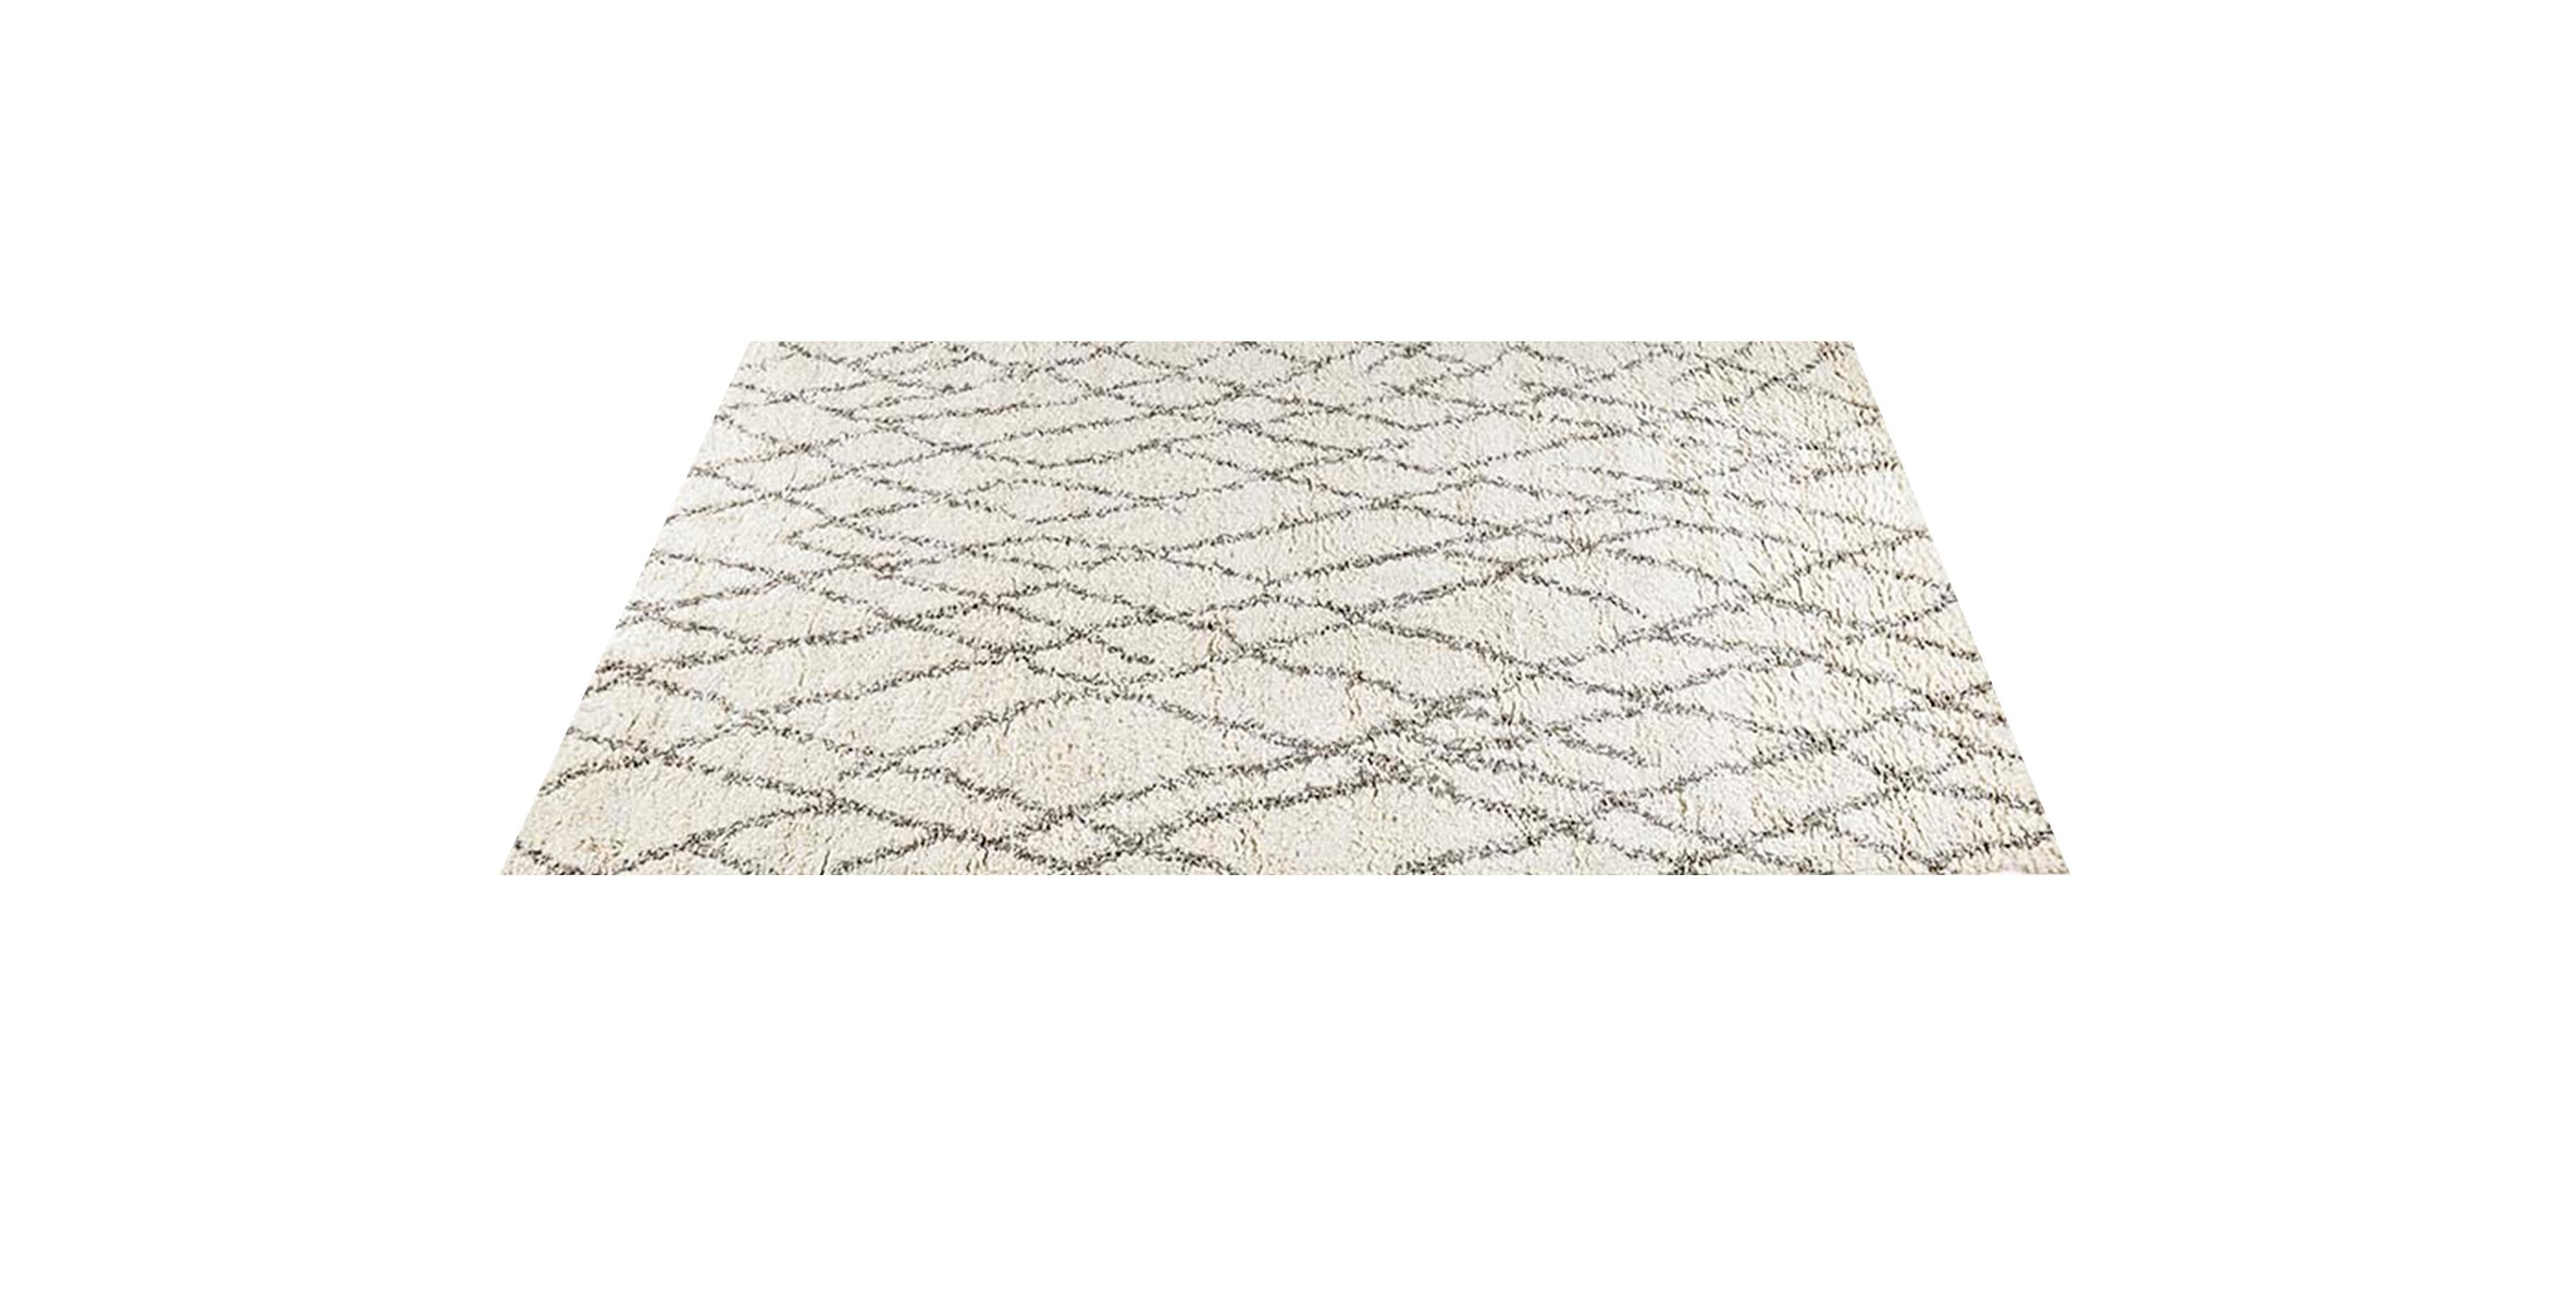 Hand-knotted by master artisans from ultra-plush wool, our rug is sheared to a sumptuous, extra-long pile. The distinctive design‚ sketched diamonds on a naturally multi-toned background. Brings a sophisticated energy to any space. Ben is inspired